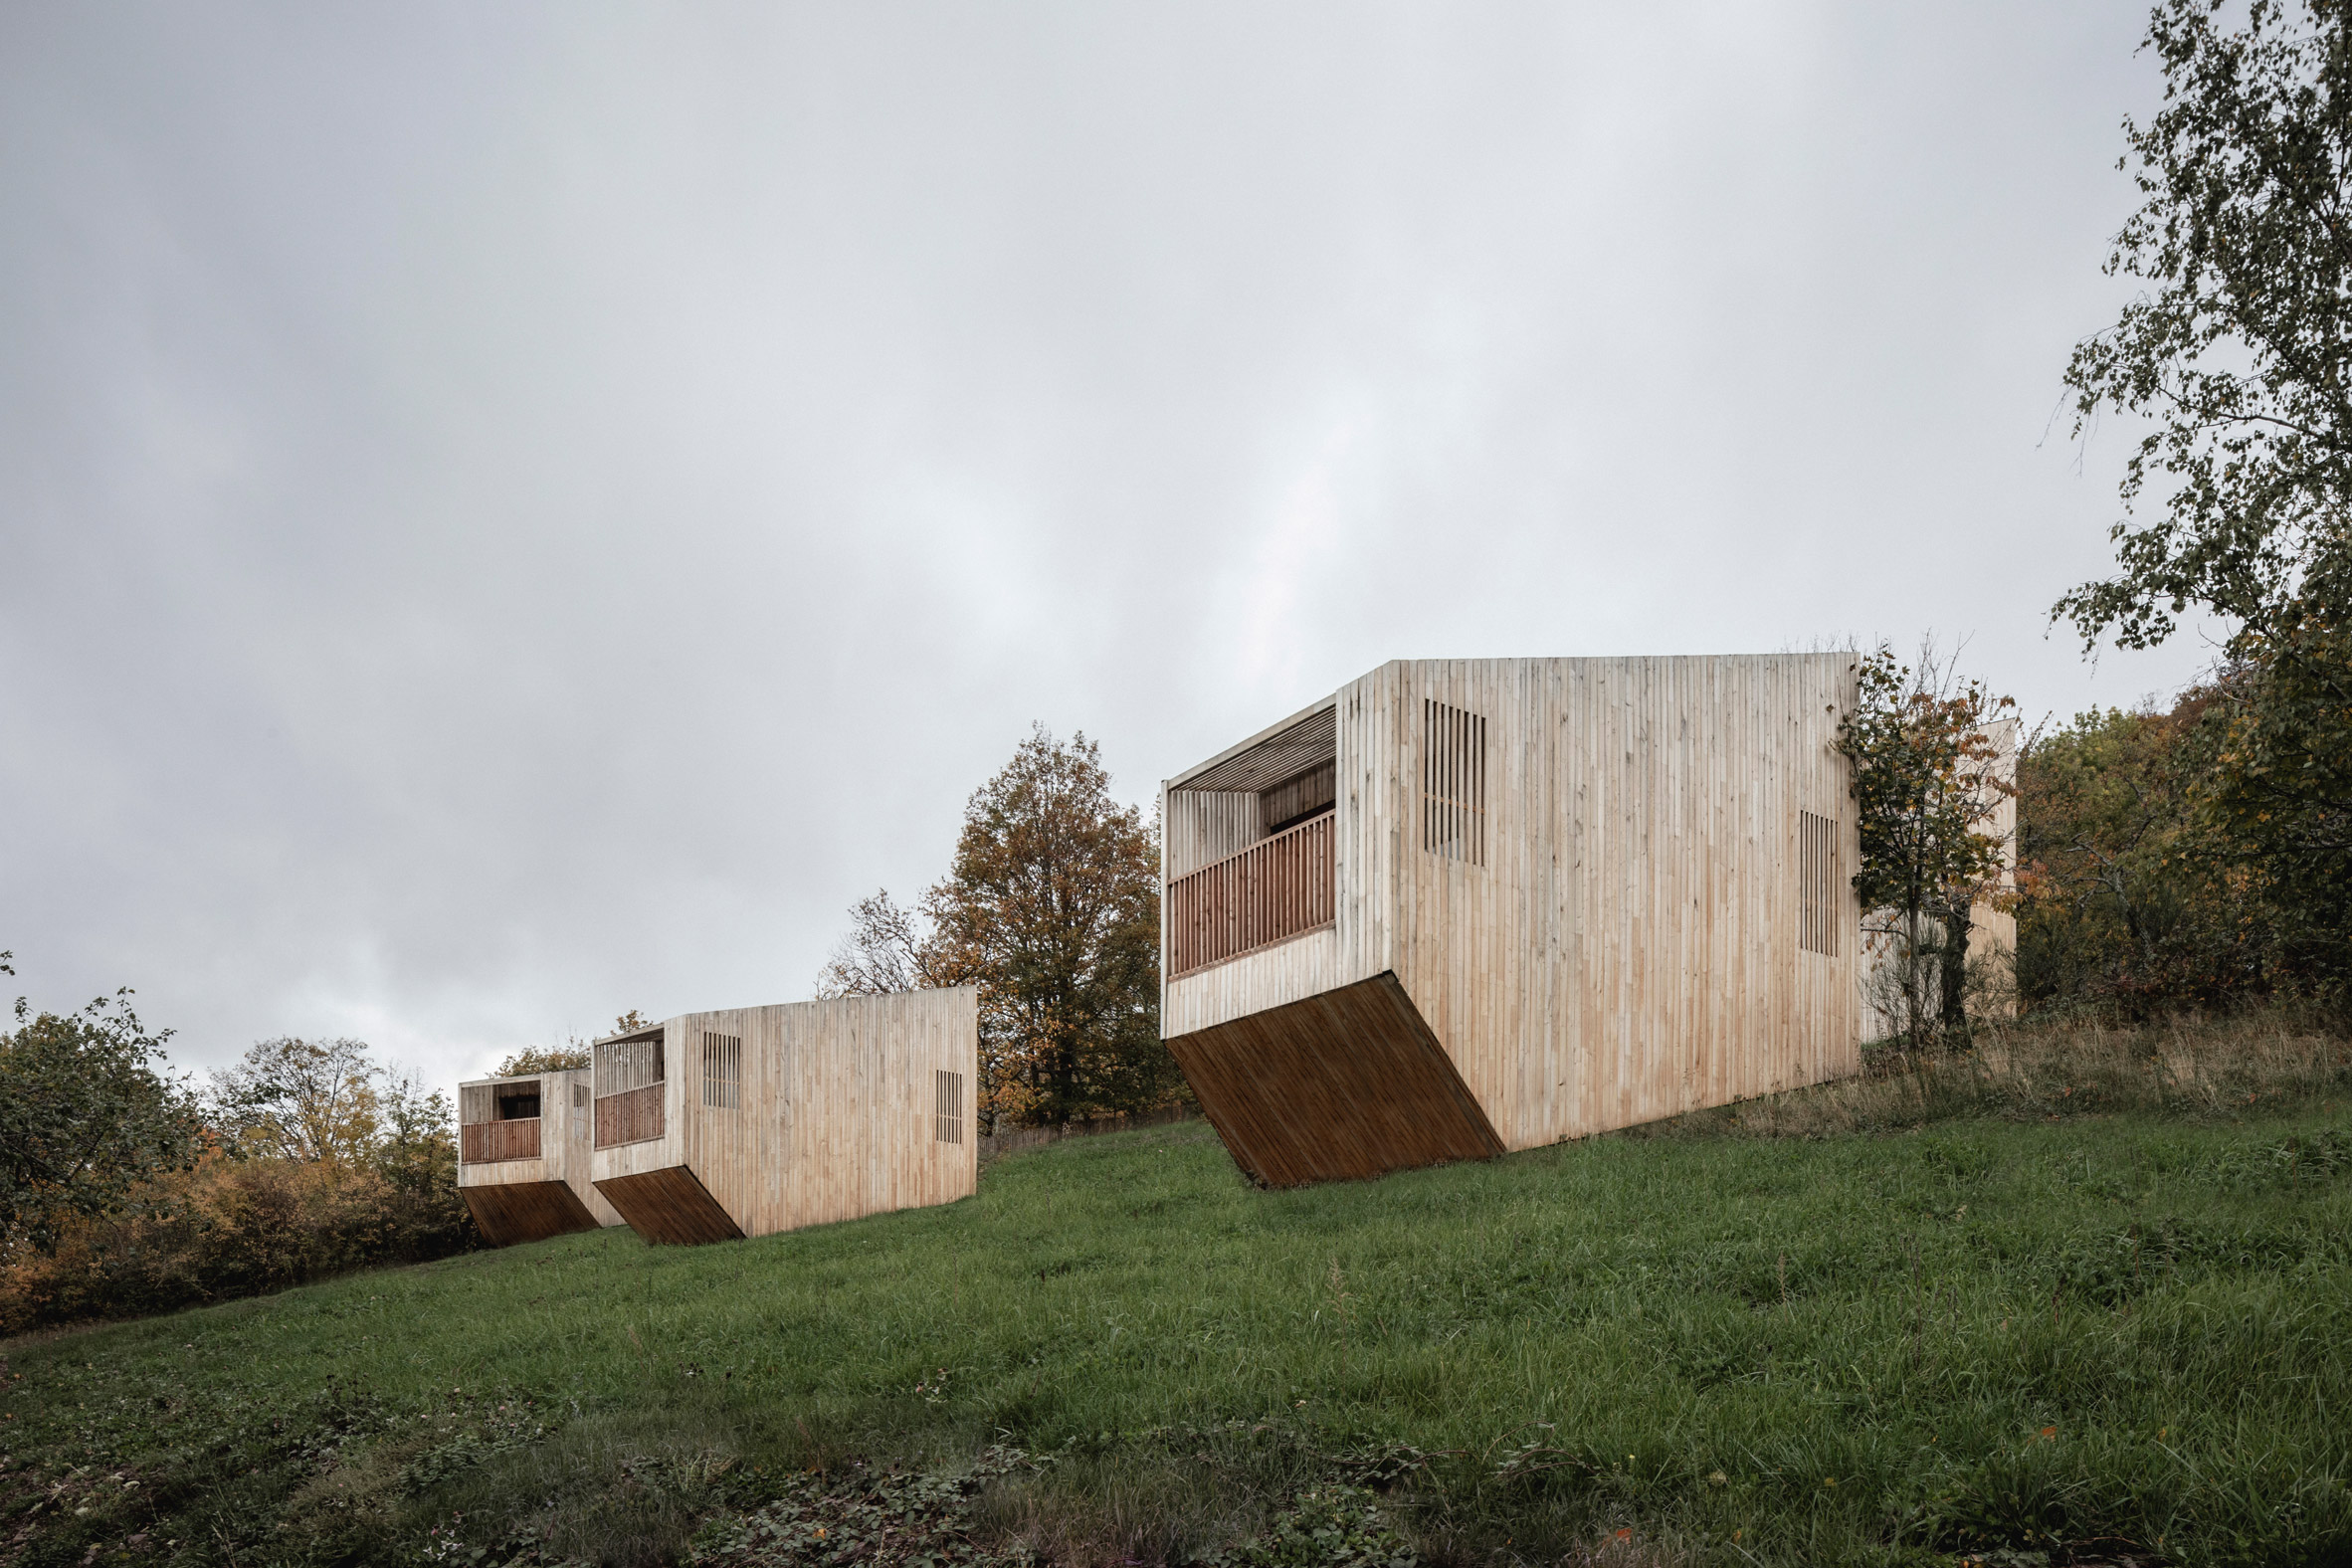 Wooden cabins scattered across grass